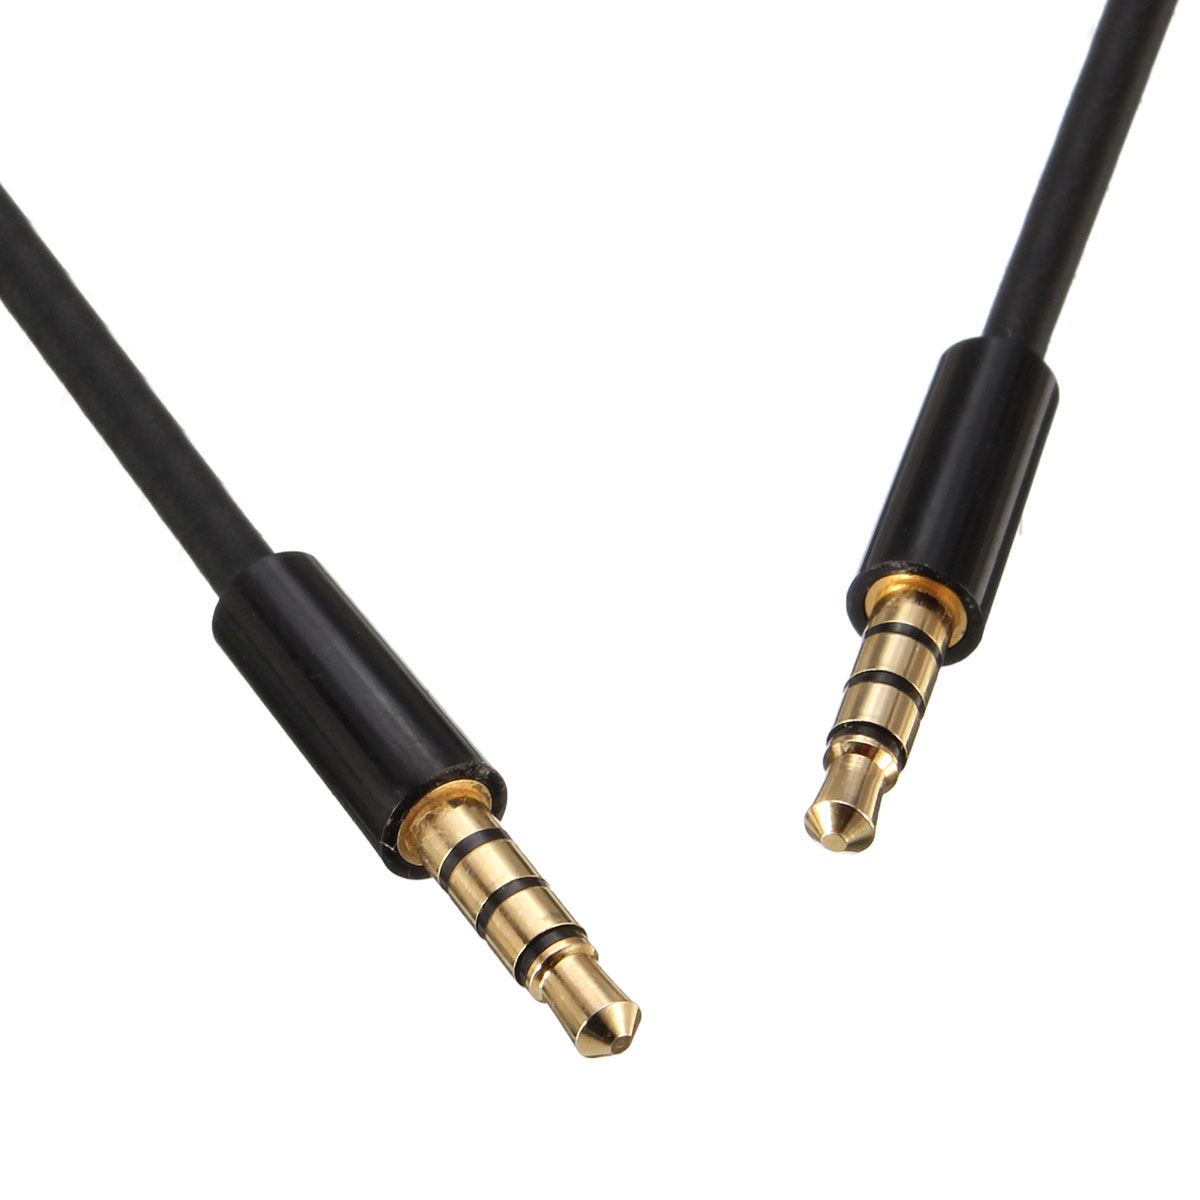 35mm-Head-Phone-Male-to-Male-Aux-Cord-Stereo-Audio-Cable-1164540